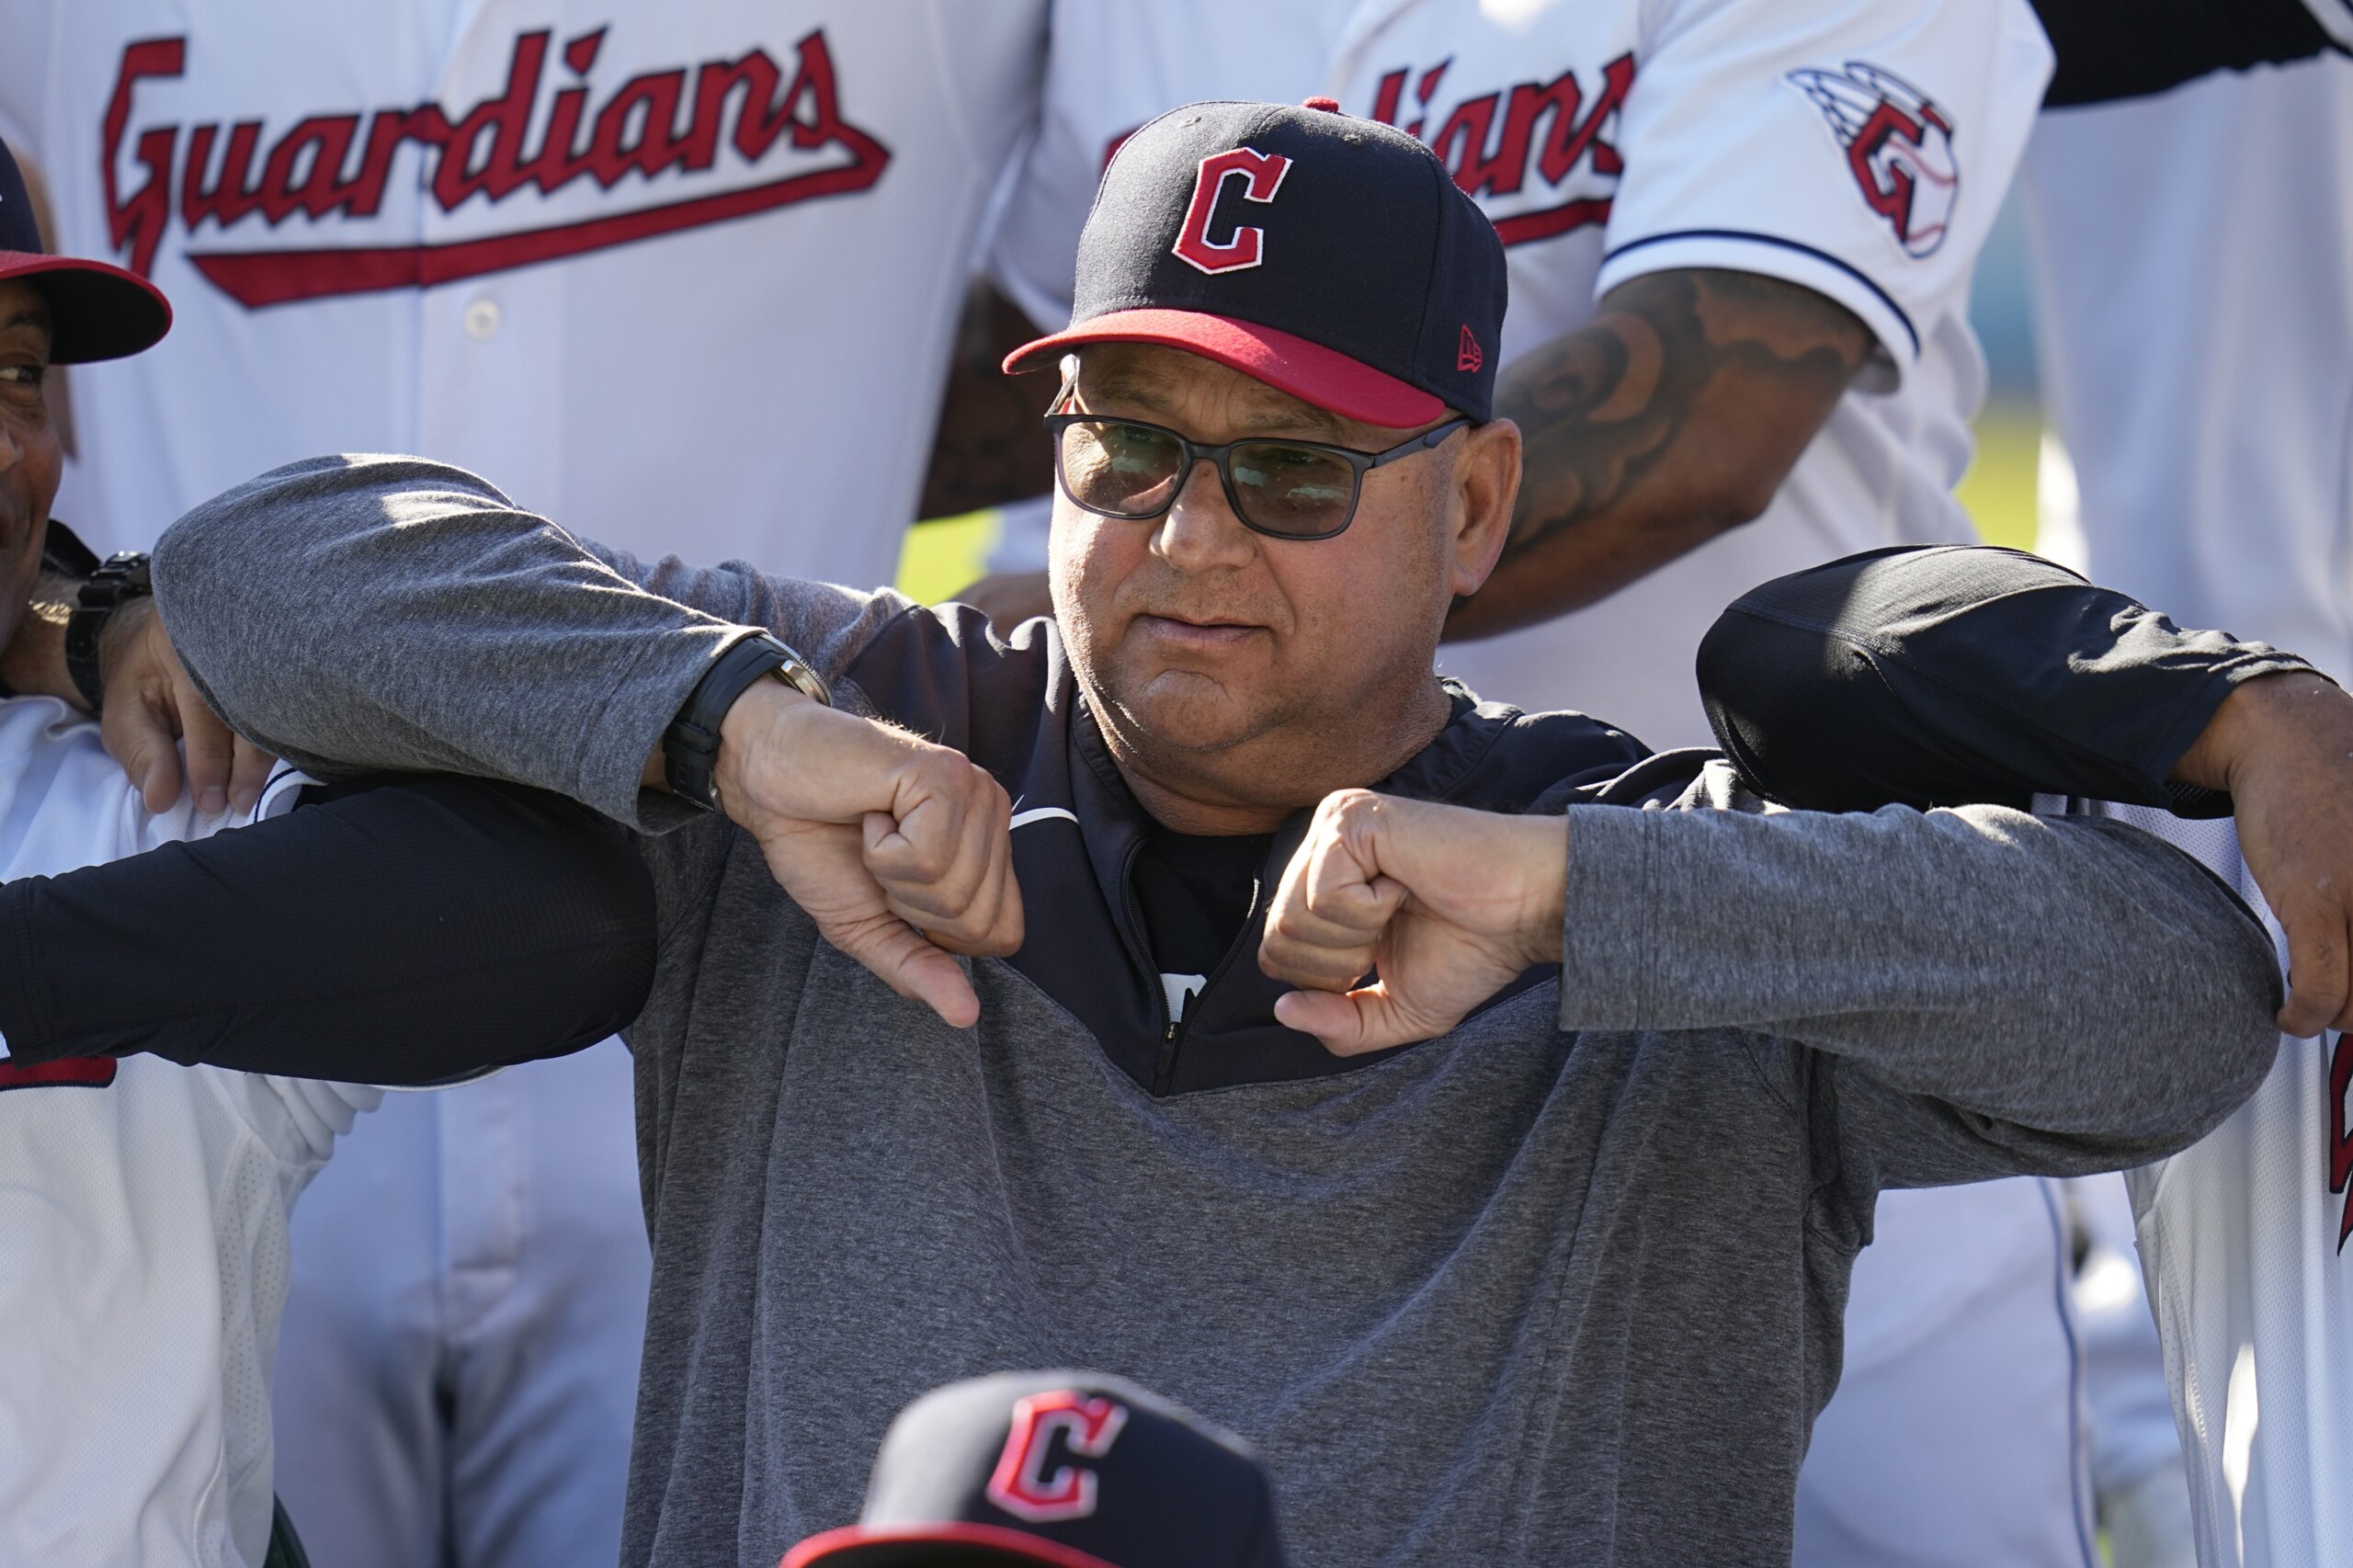 One of games characters, Guardians manager Terry Francona set to end career defined by class, touch